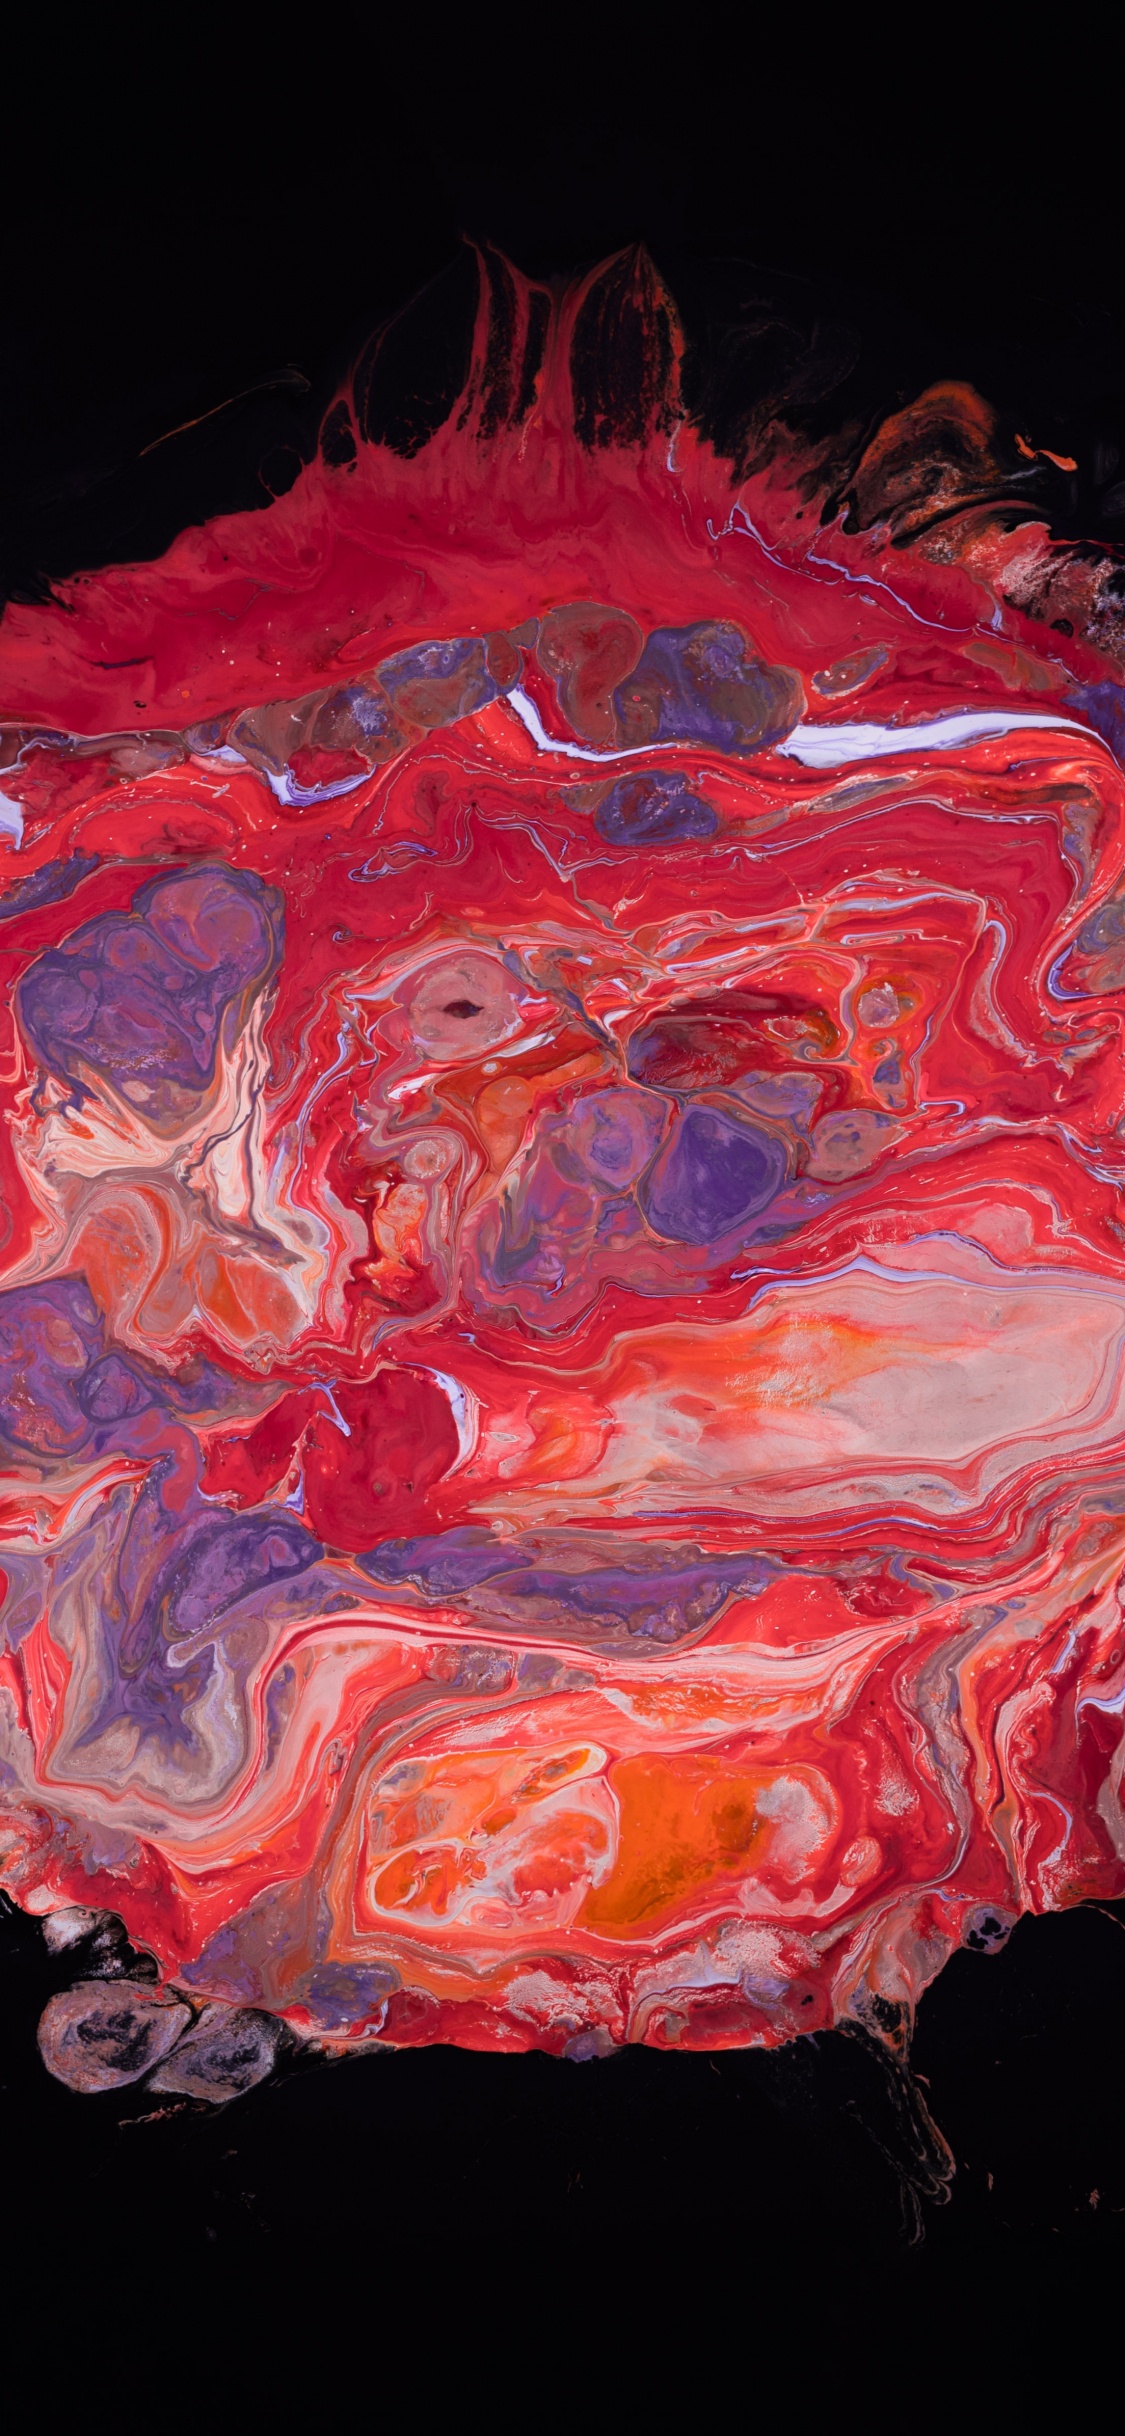 Red and White Abstract Painting. Wallpaper in 1125x2436 Resolution